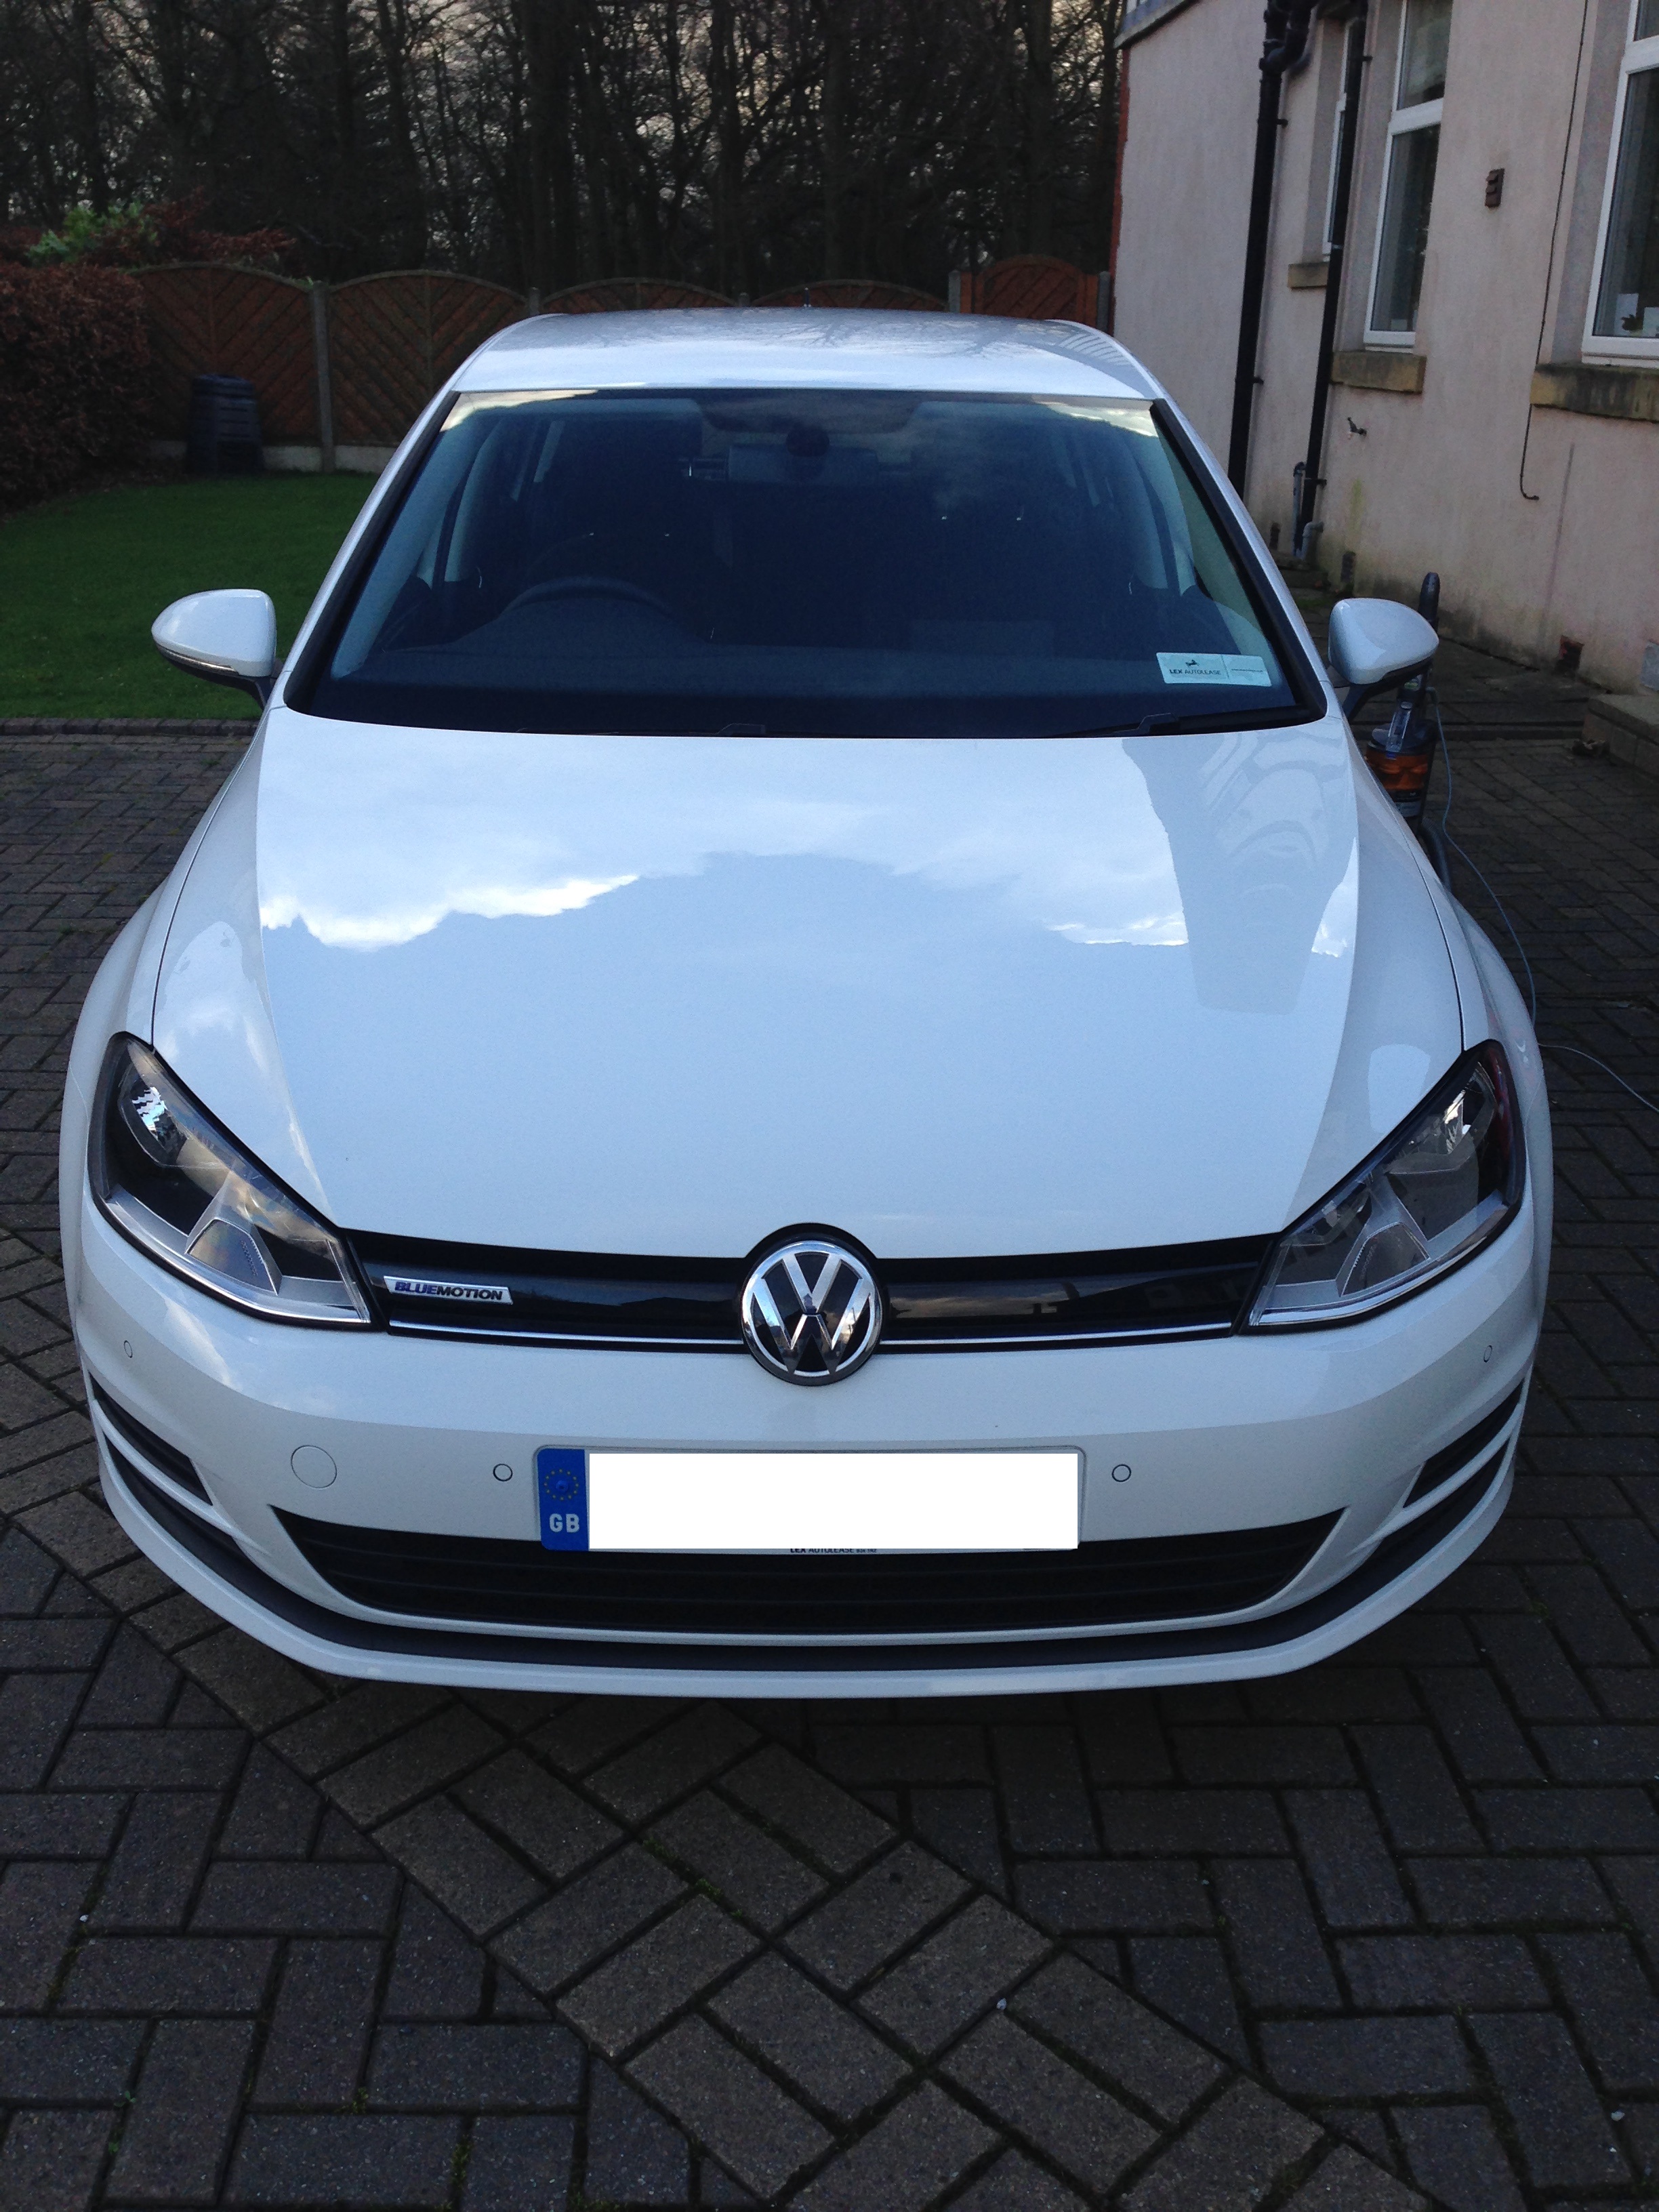 The Car Spotter's review of the 2015 Volkswagen Bluemotion TDI Mk7 – The Car Spotter